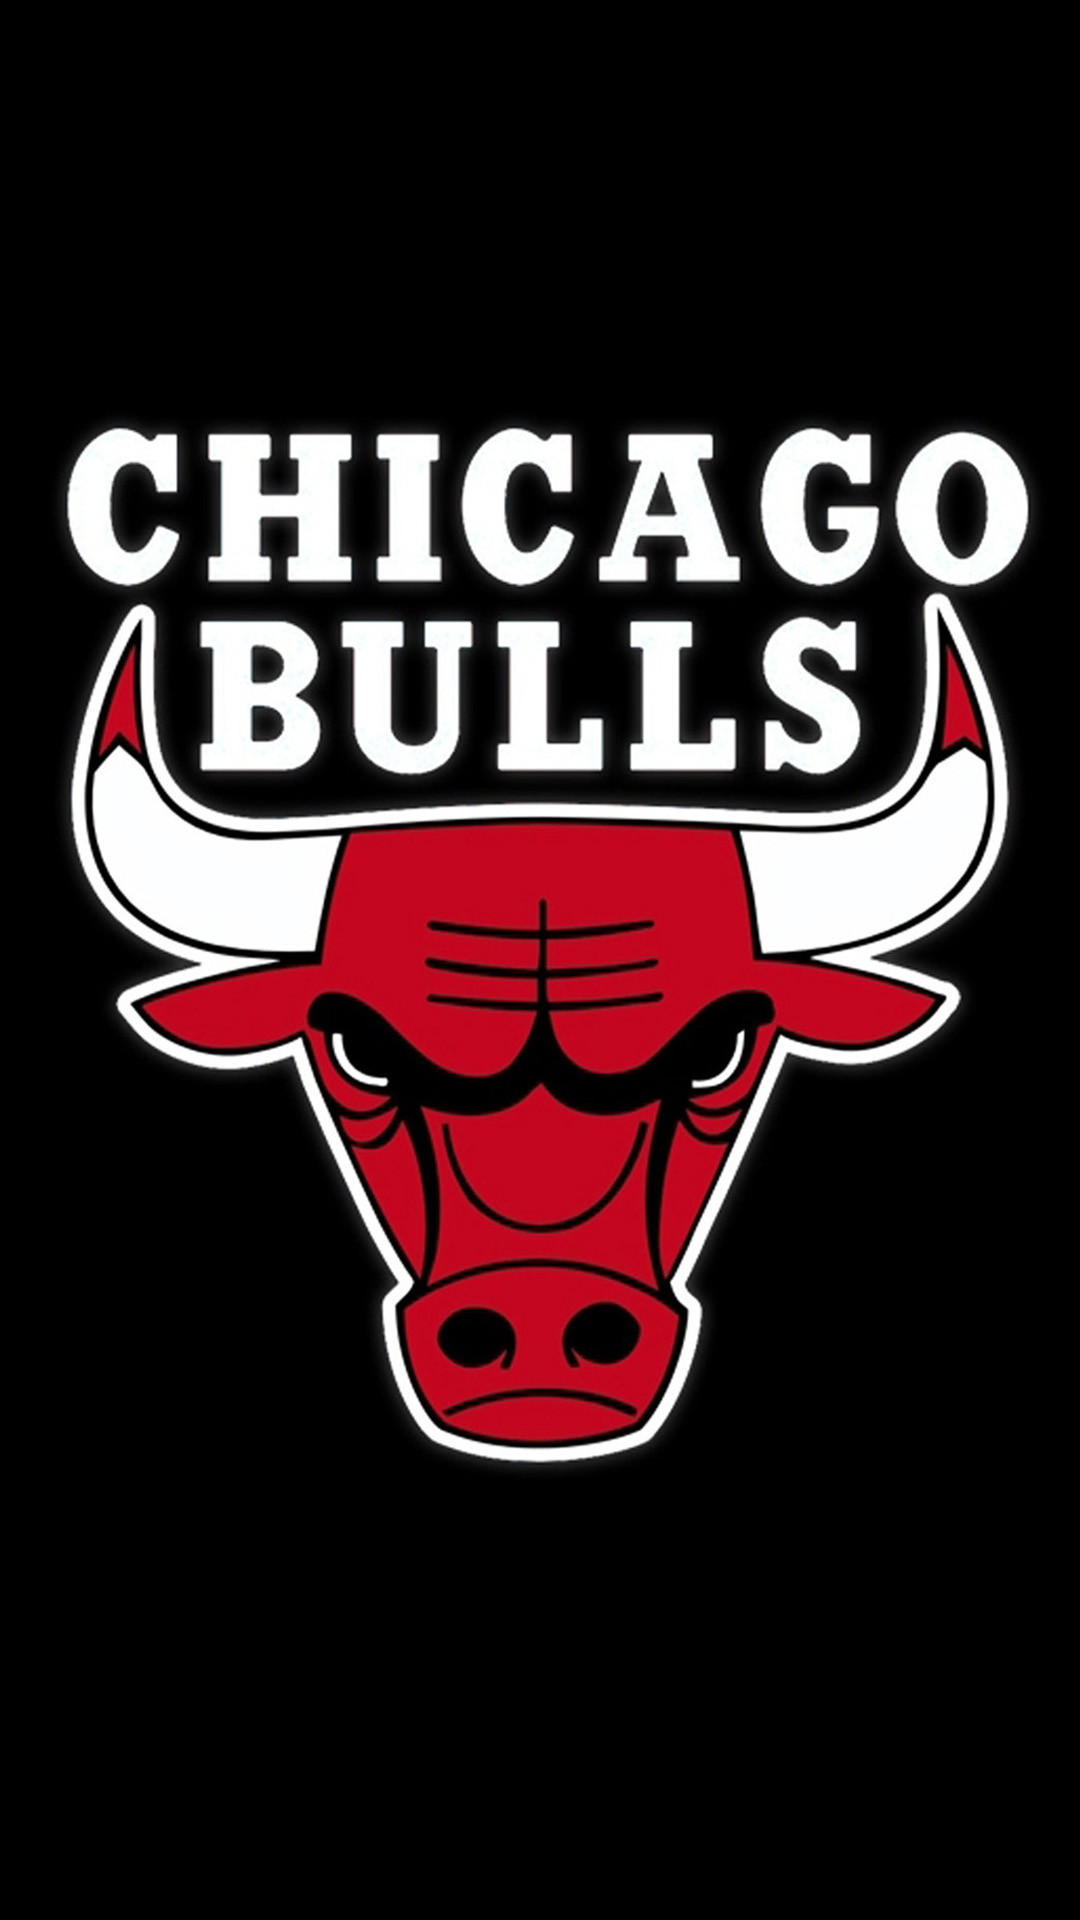 Go Bulls! I am very excited about the squad.